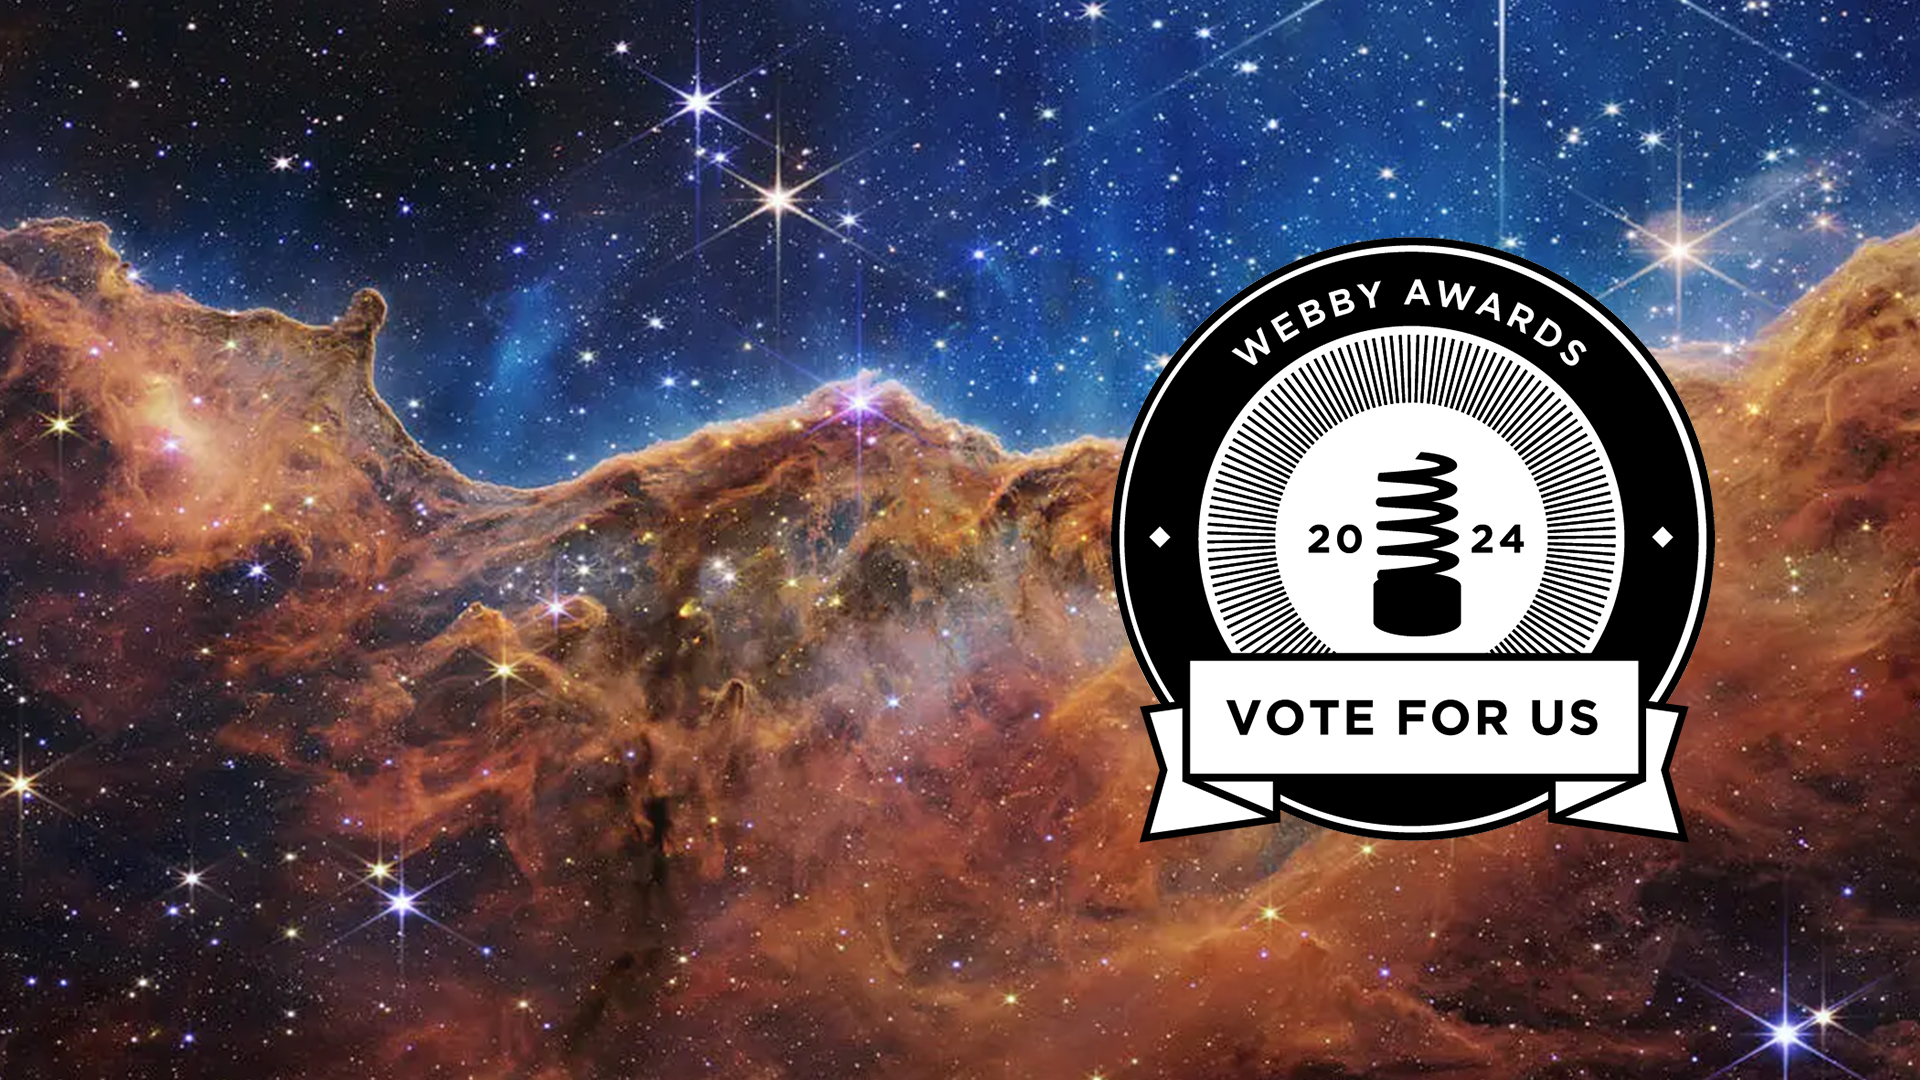 A circular black and white logo with "Webby Awards" around the top, "Vote for Us" near the bottom, and "2024" and a stylized version of the Webby Award in the center is visible as a right-aligned overlay to an image of the Carina Nebula from the James Webb Telescope. That image is divided horizontally by an undulating line between a cloudscape forming a nebula along the bottom portion and a comparatively clear upper portion. Speckled across both portions is a starfield, showing innumerable stars of many sizes. The smallest of these are small, distant, and faint points of light. The largest of these appear larger, closer, brighter, and more fully resolved with 8-point diffraction spikes. The upper portion of the image is blueish, and has wispy translucent cloud-like streaks rising from the nebula below. The orangish cloudy formation in the bottom half varies in density and ranges from translucent to opaque. The stars vary in color, the majority of which have a blue or orange hue. The cloud-like structure of the nebula contains ridges, peaks, and valleys – an appearance very similar to a mountain range. Three long diffraction spikes from the top right edge of the image suggest the presence of a large star just out of view. Credits: NASA, ESA, CSA, and STScI